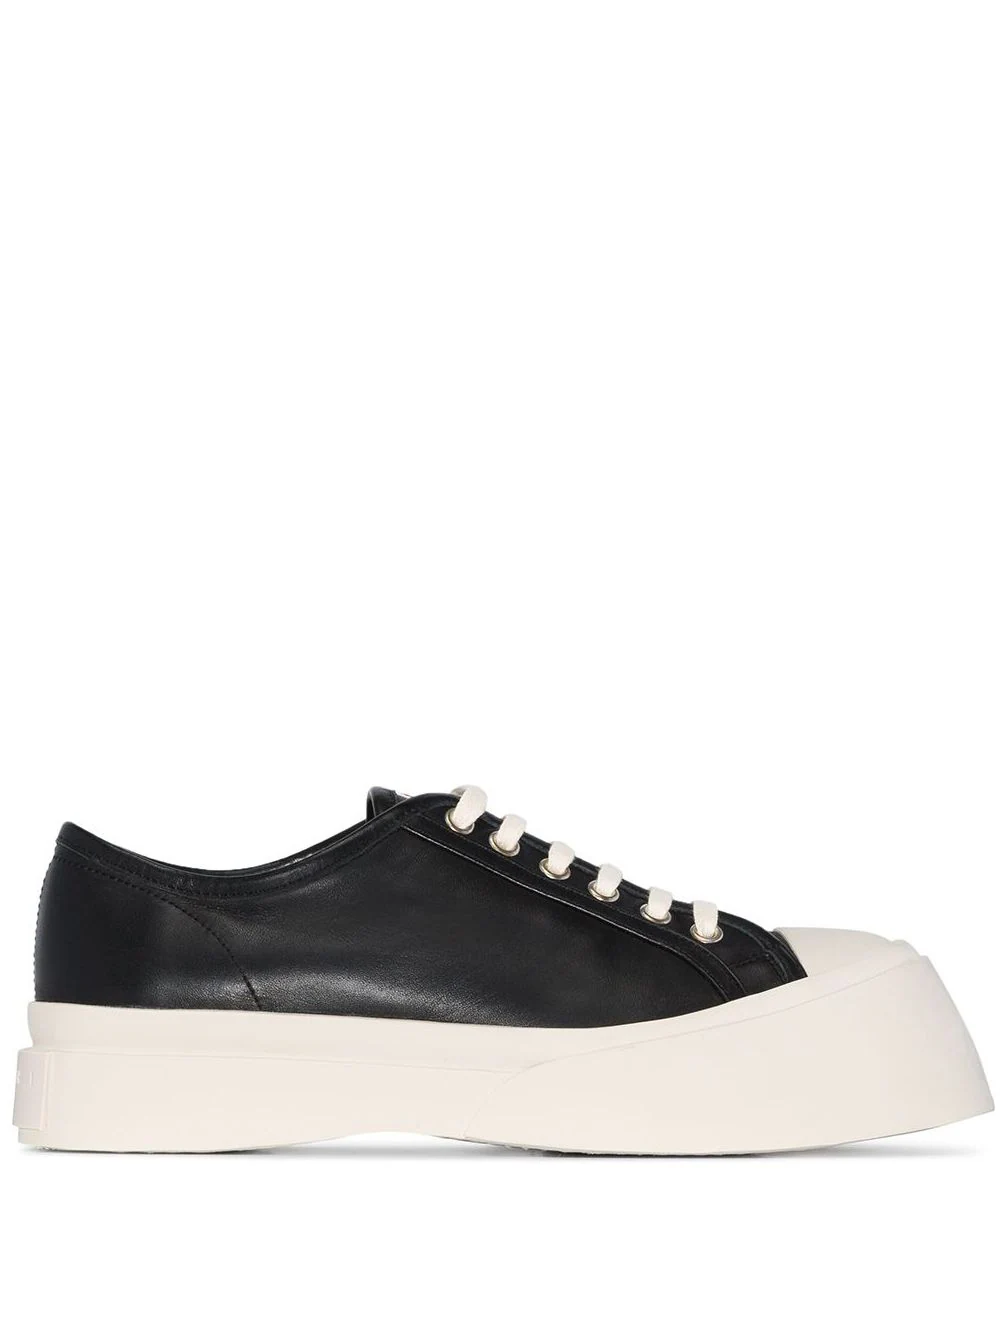 MARNI Women Pablo Lace Up Sneakers